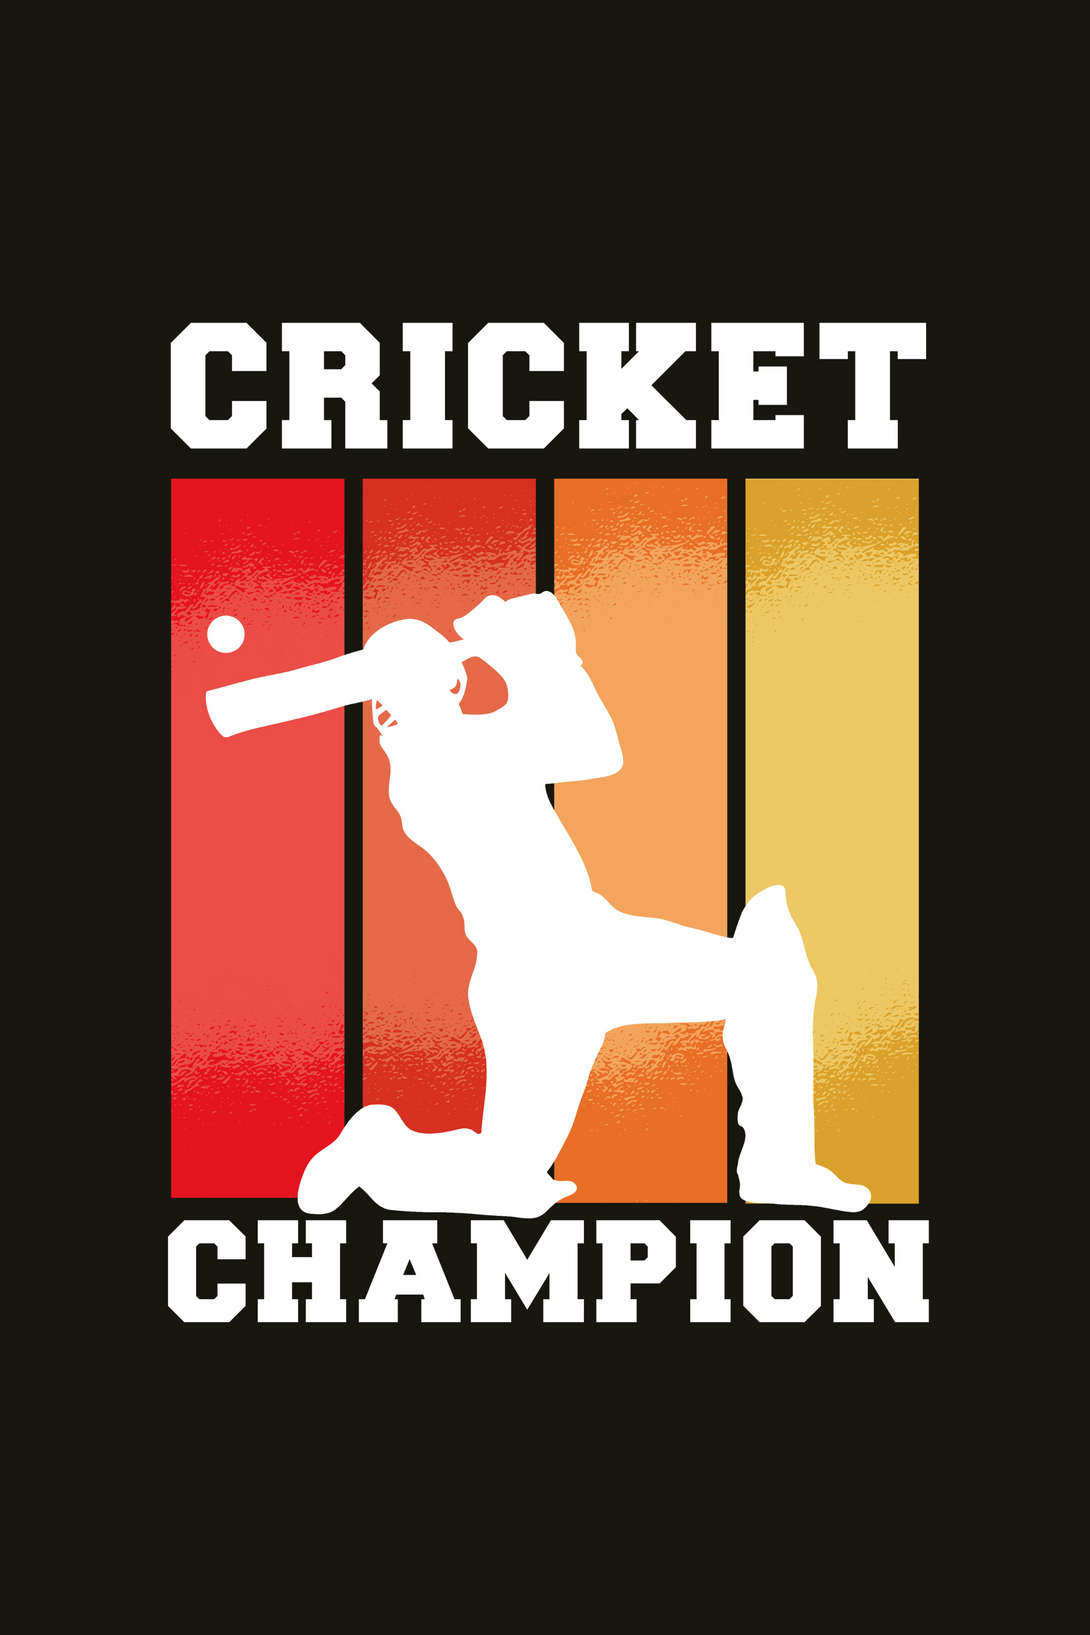 Cricket Champion Printed T-Shirt For Men - WowWaves - 1